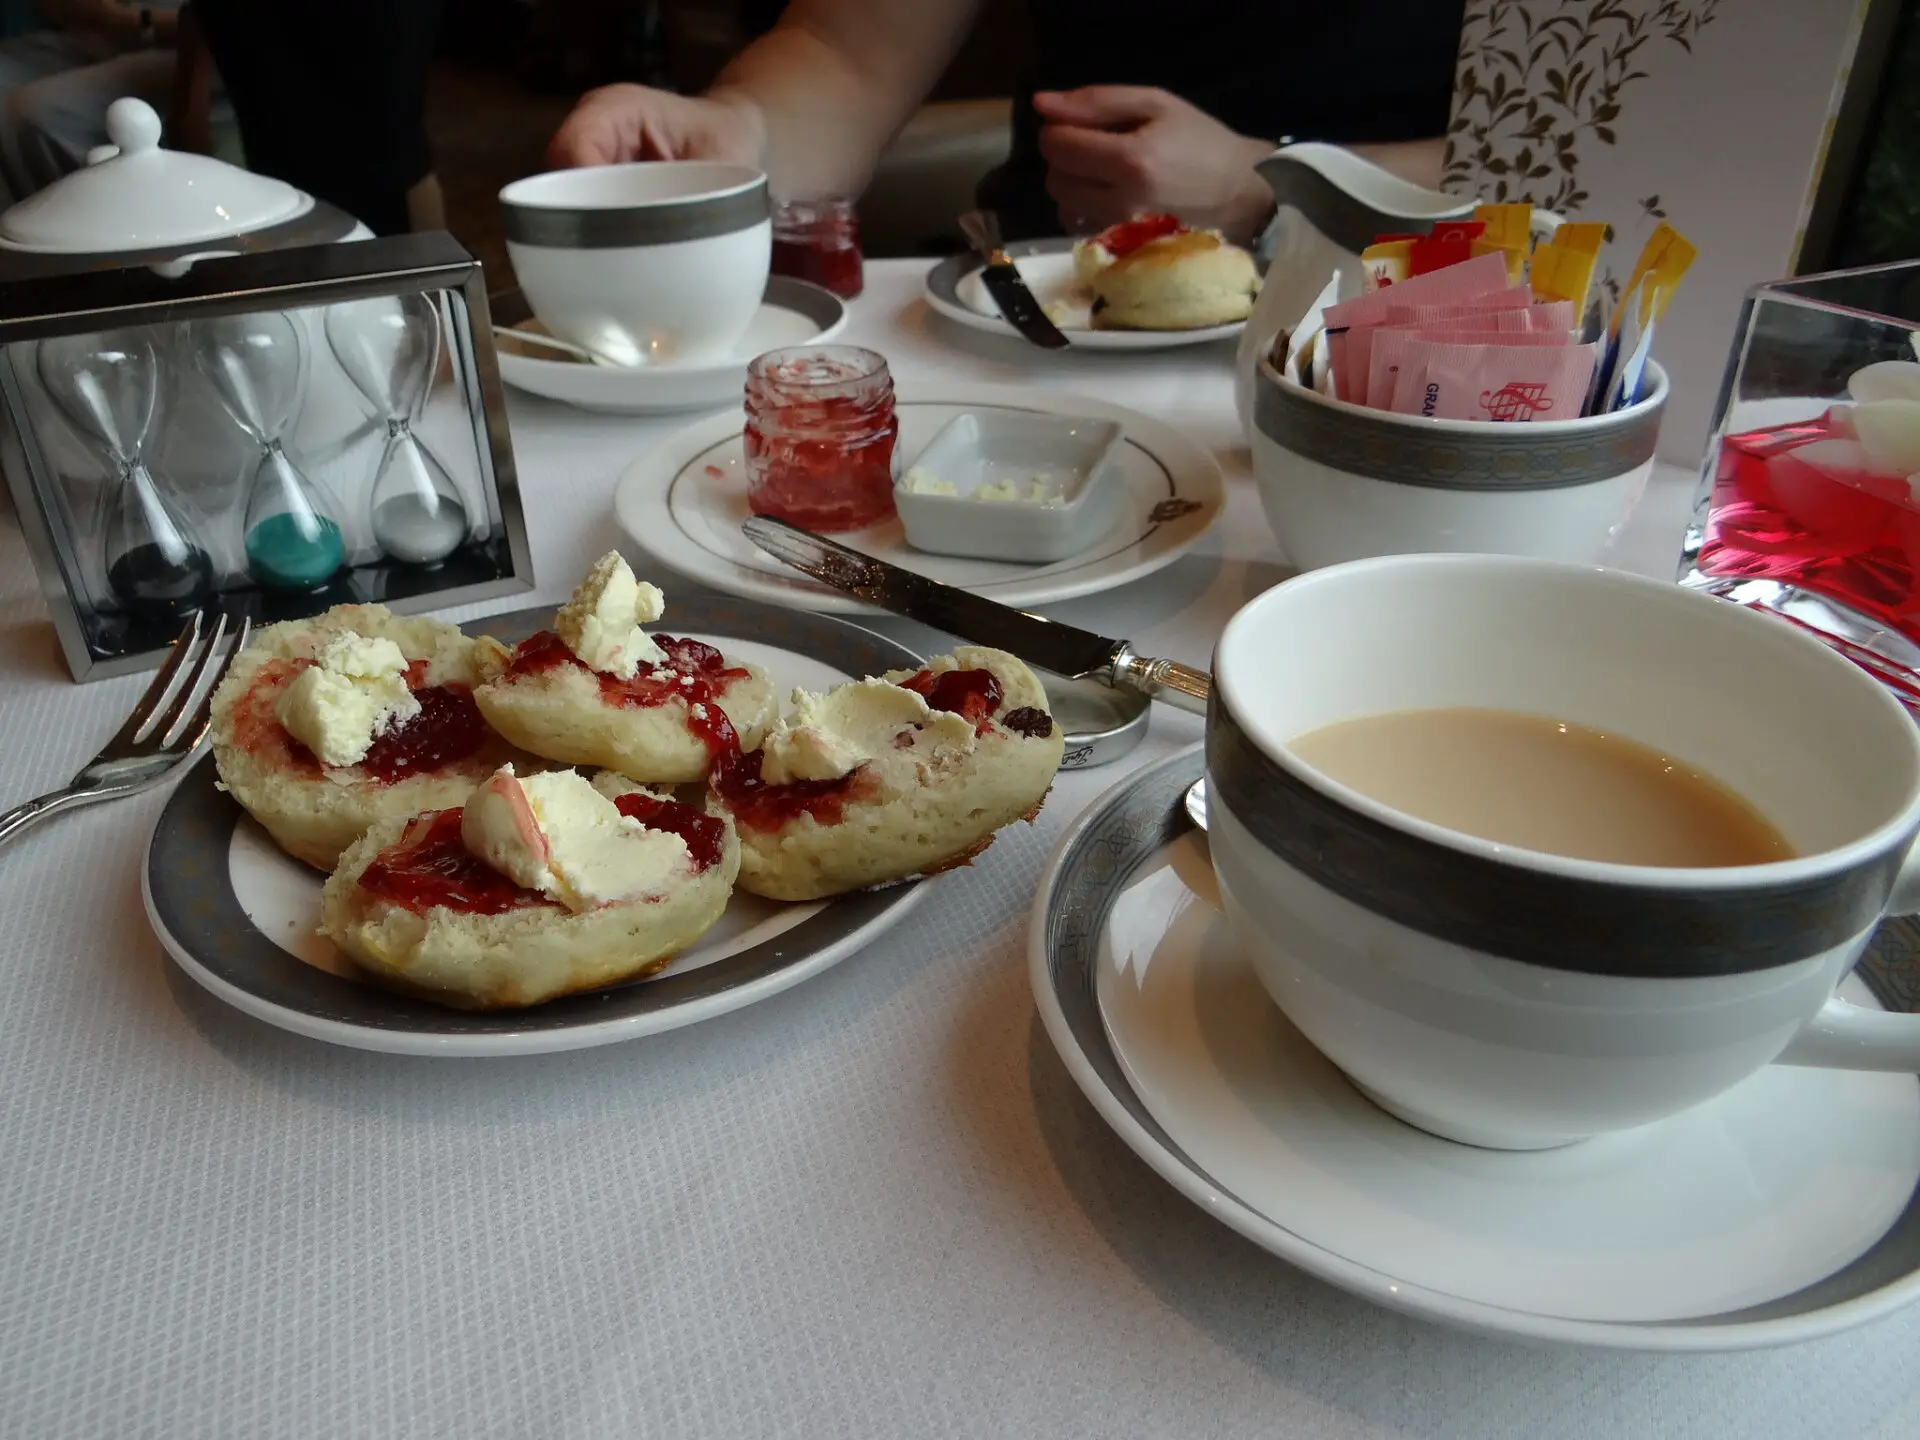 Two cups of tea and two plates of scones with jam and clotted cream